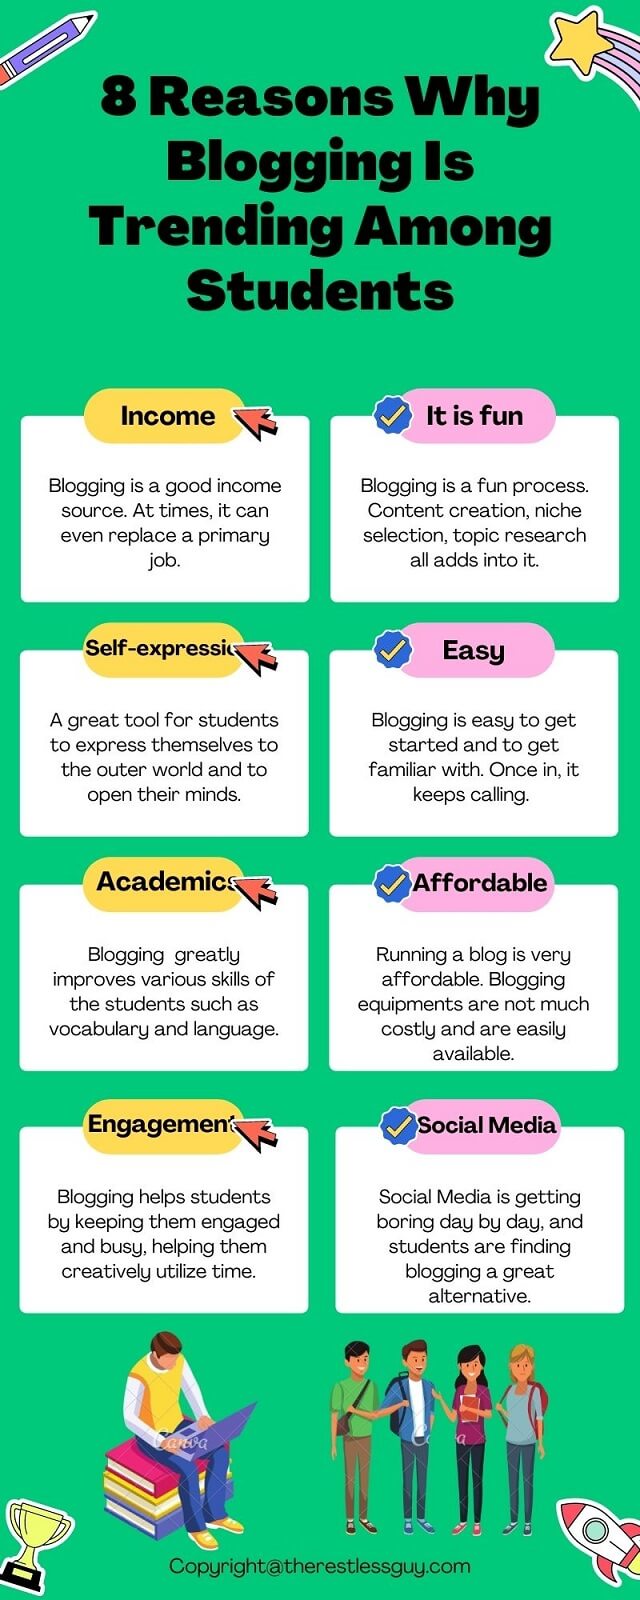 Infograpgic on why blogging is trending among students